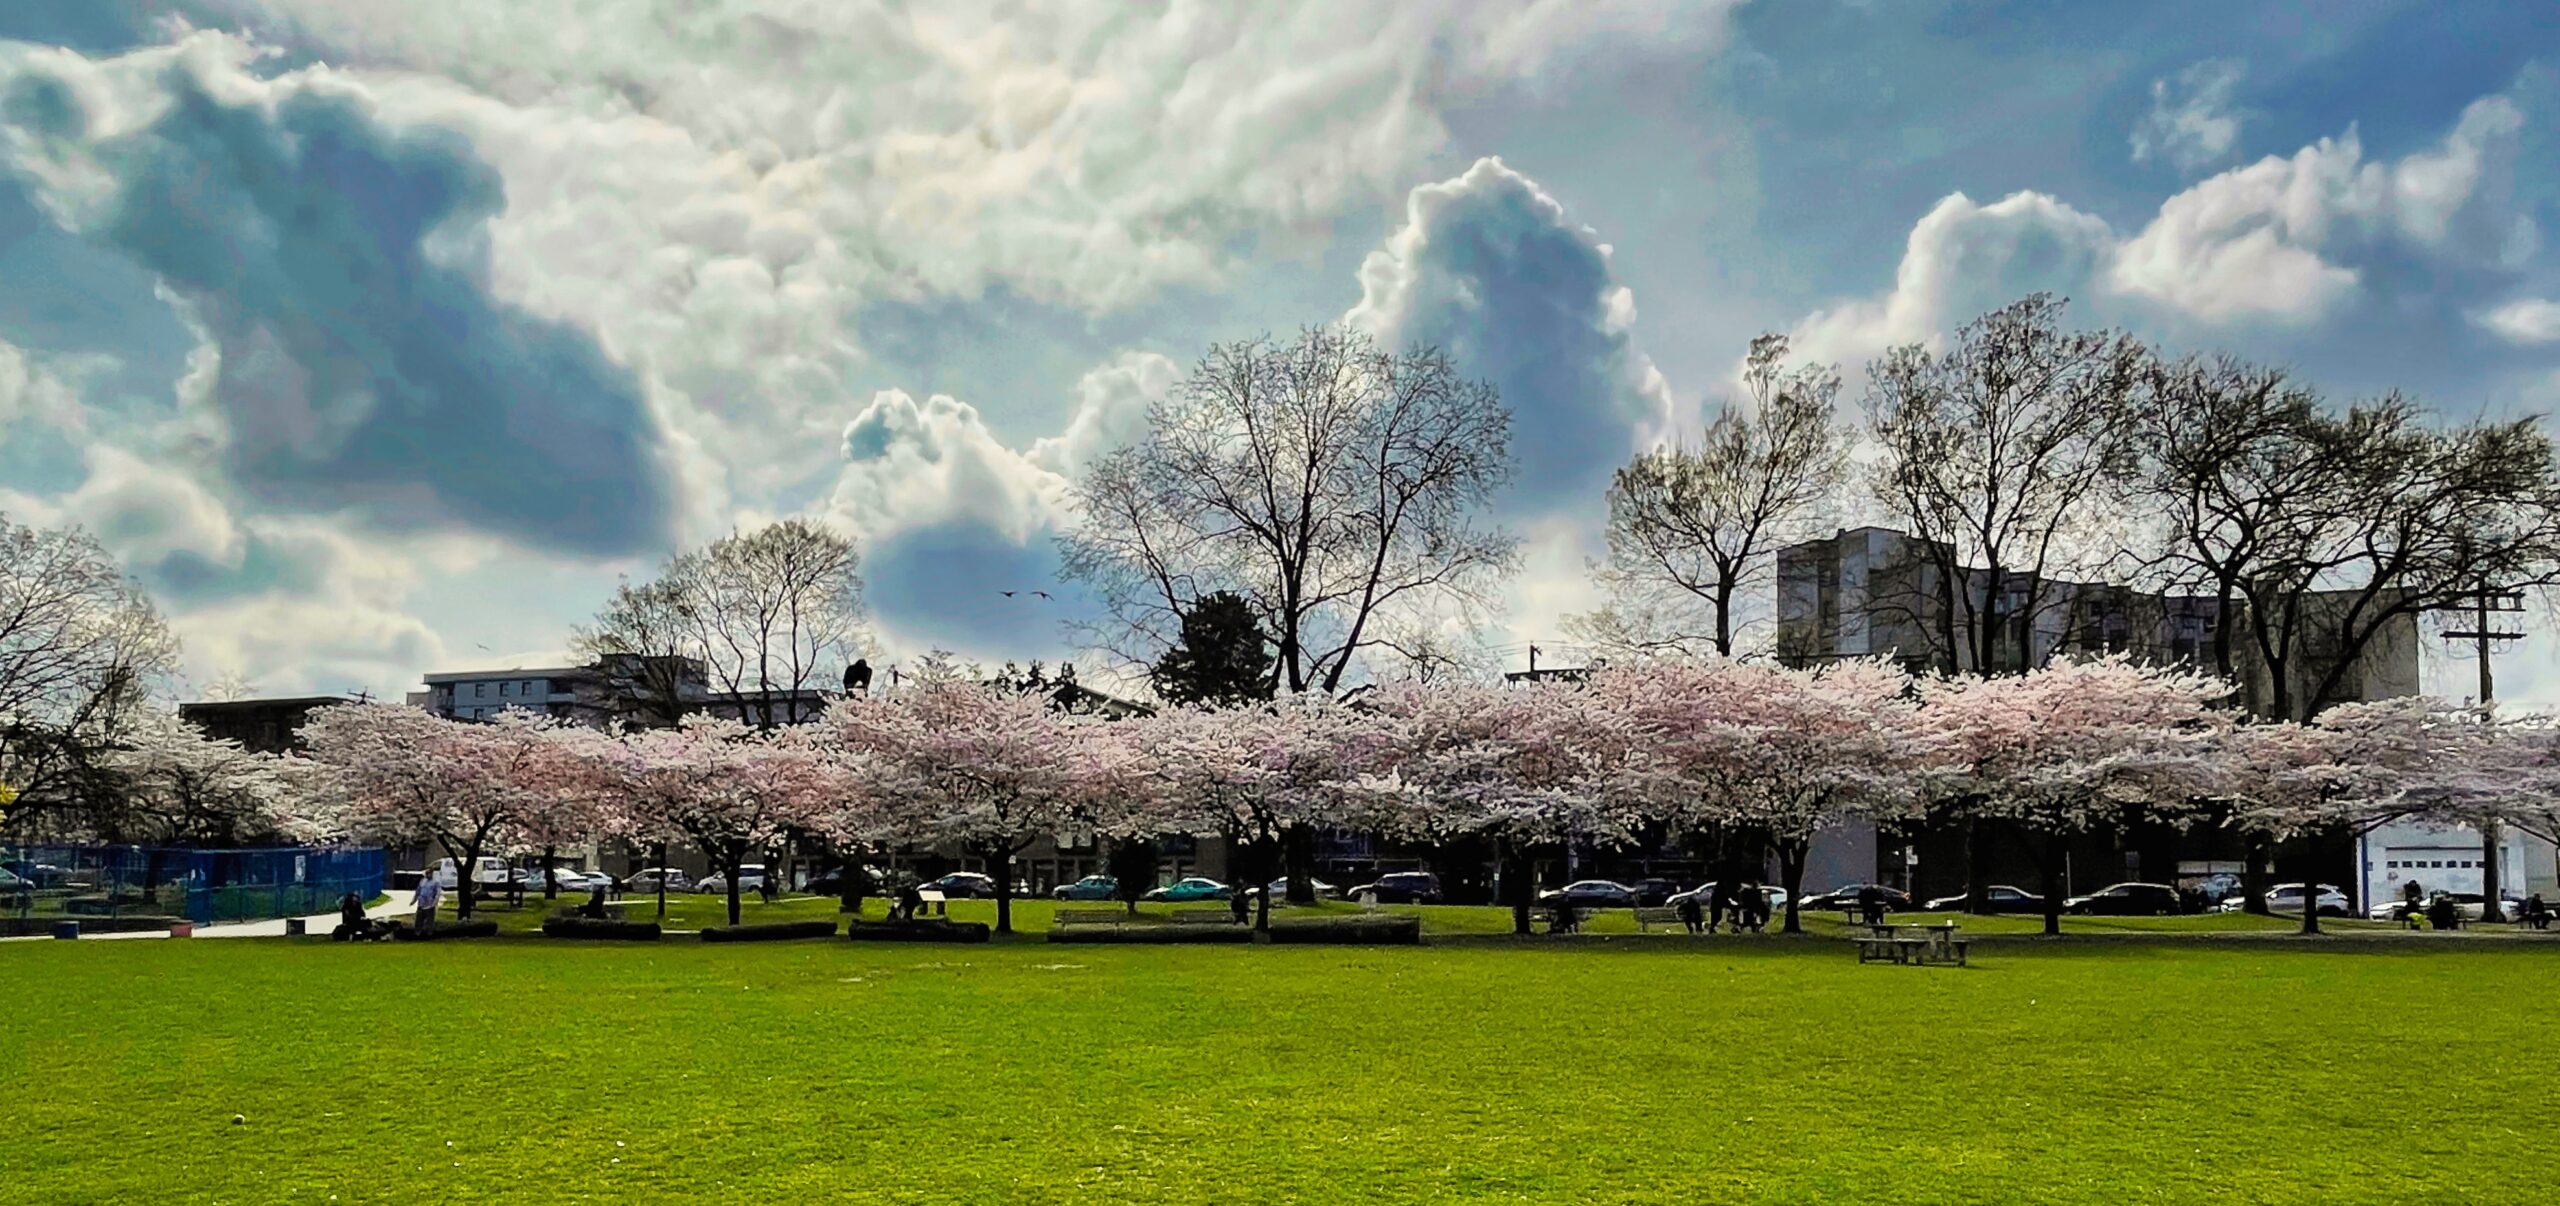 This is a photo of Oppenheimer park in march. The Cherry Blossom Trees are blooming, and there are pink flower petals sprinkling the area.